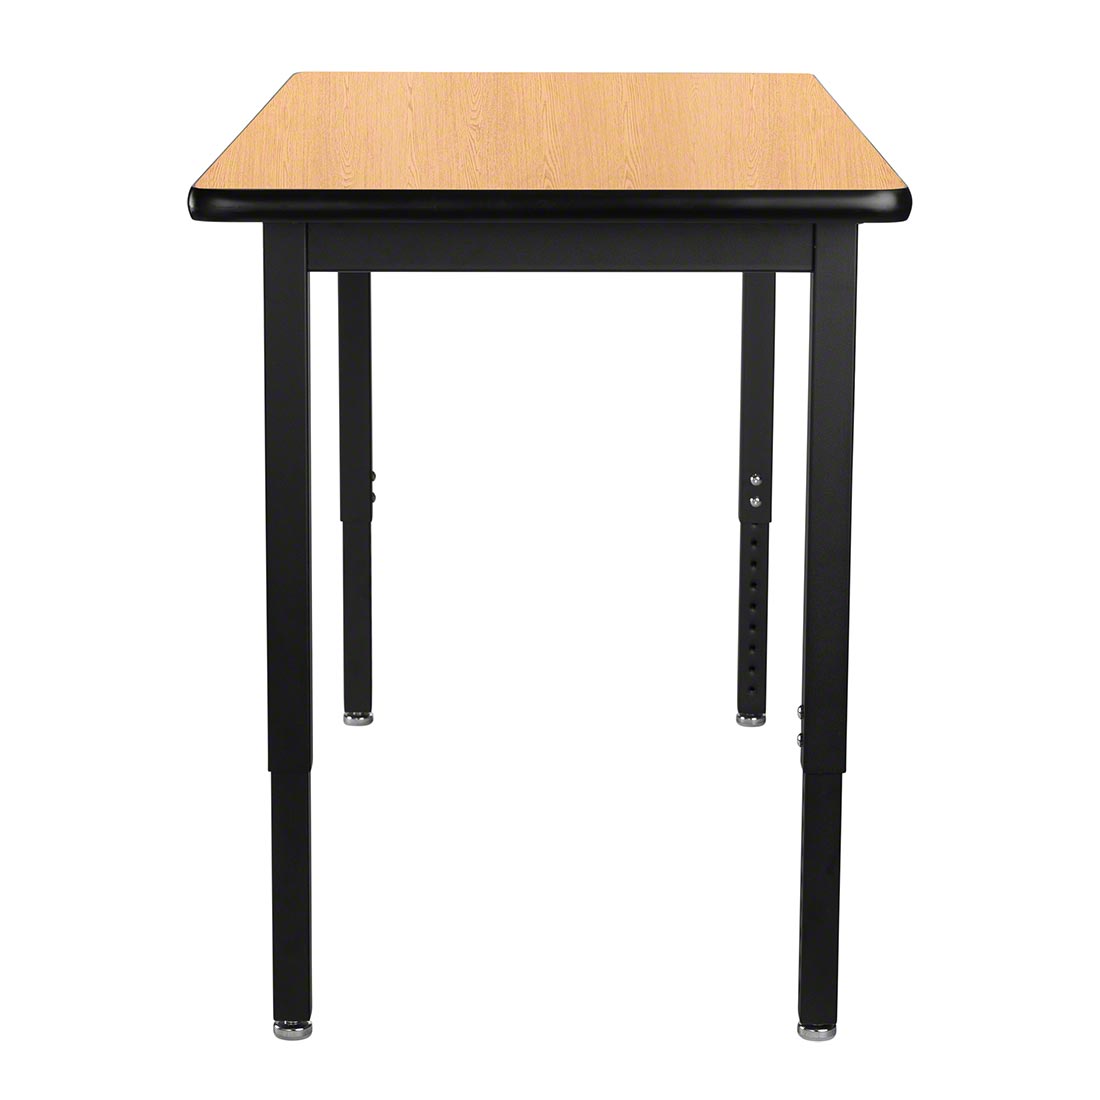 24x60 Heavy Duty Height Adjustable Table With Casters And